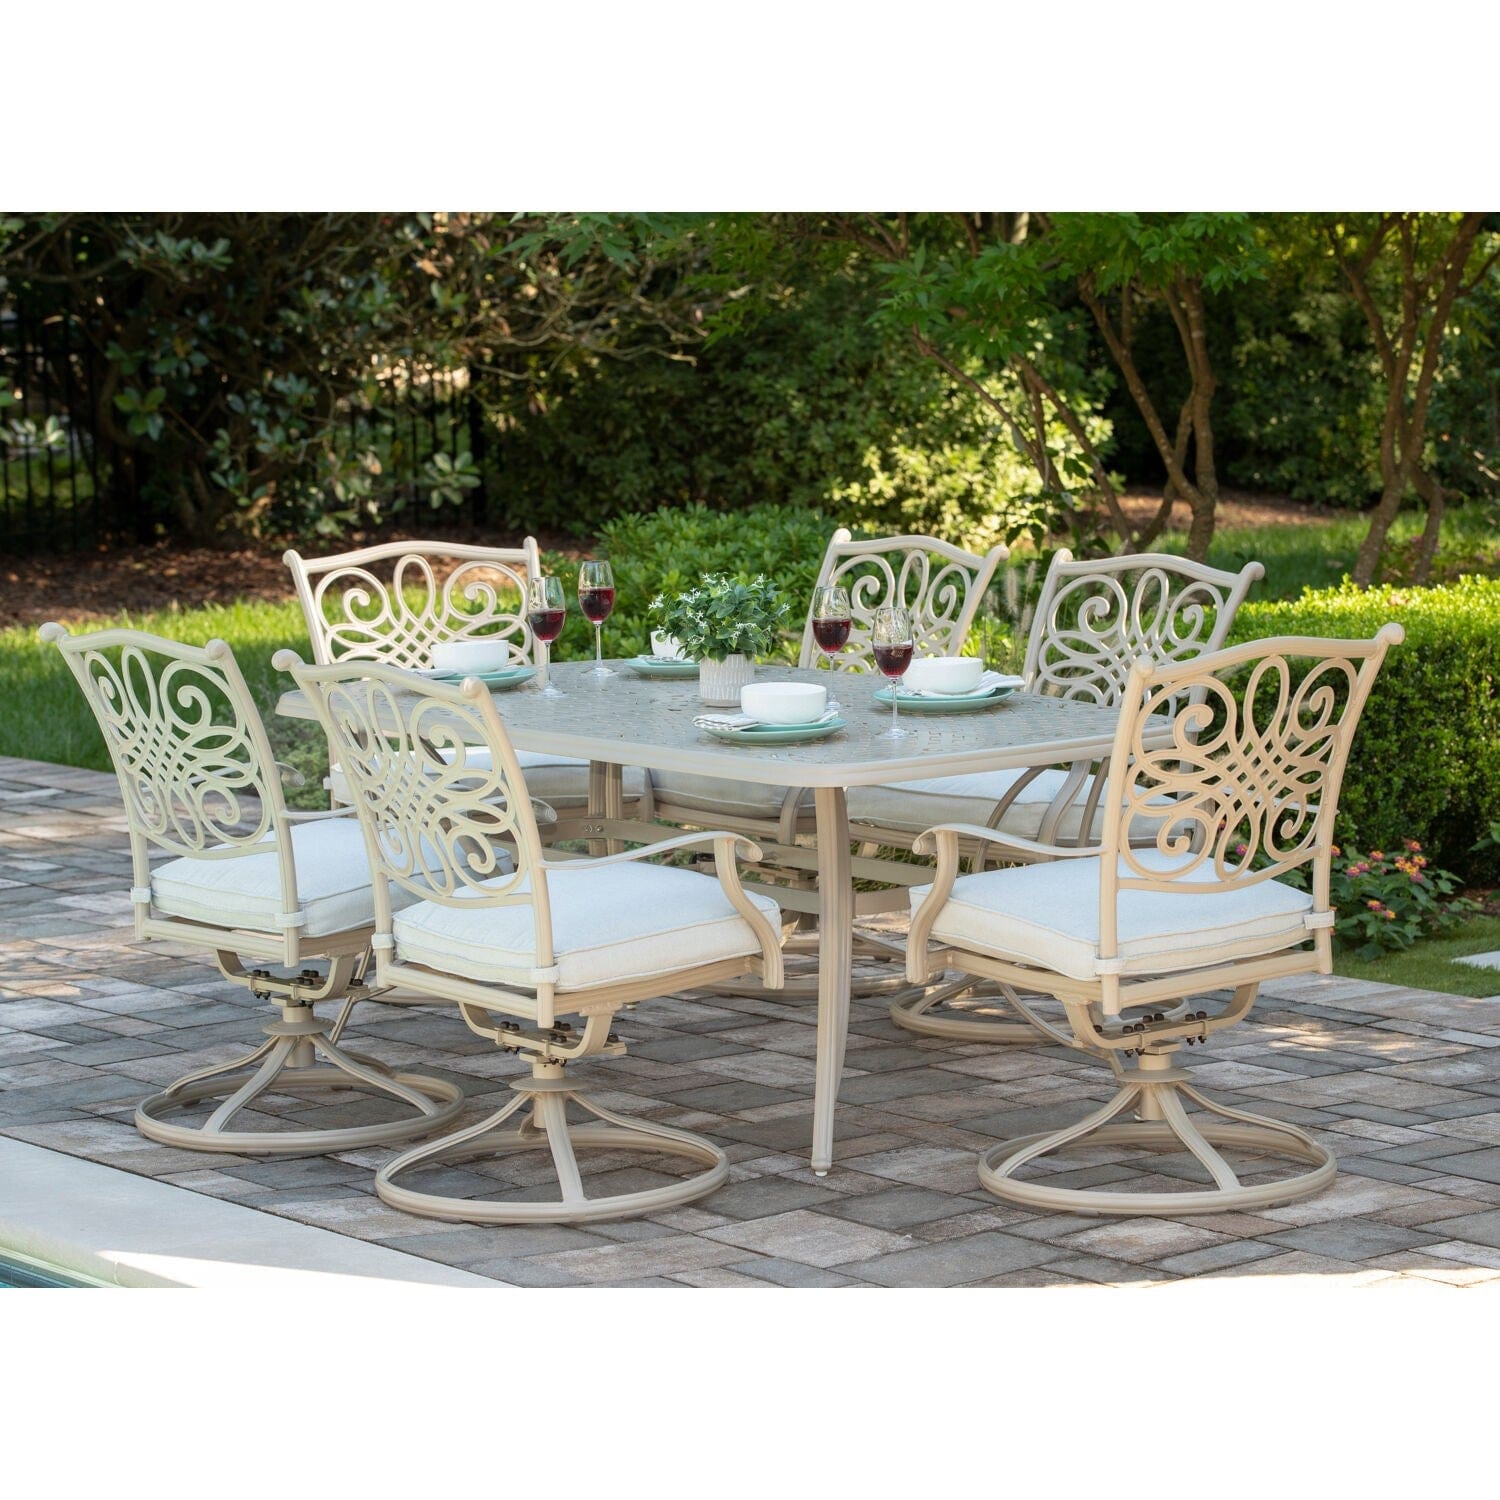 Hanover Outdoor Dining Set Hanover - Traditions 7-Piece Aluminum Frame Dining Set with 6 Swivel Rockers and 38-in. x 72-in. Cast-top Table in Sand Finish | TRADDNSD7PCSW6-BE